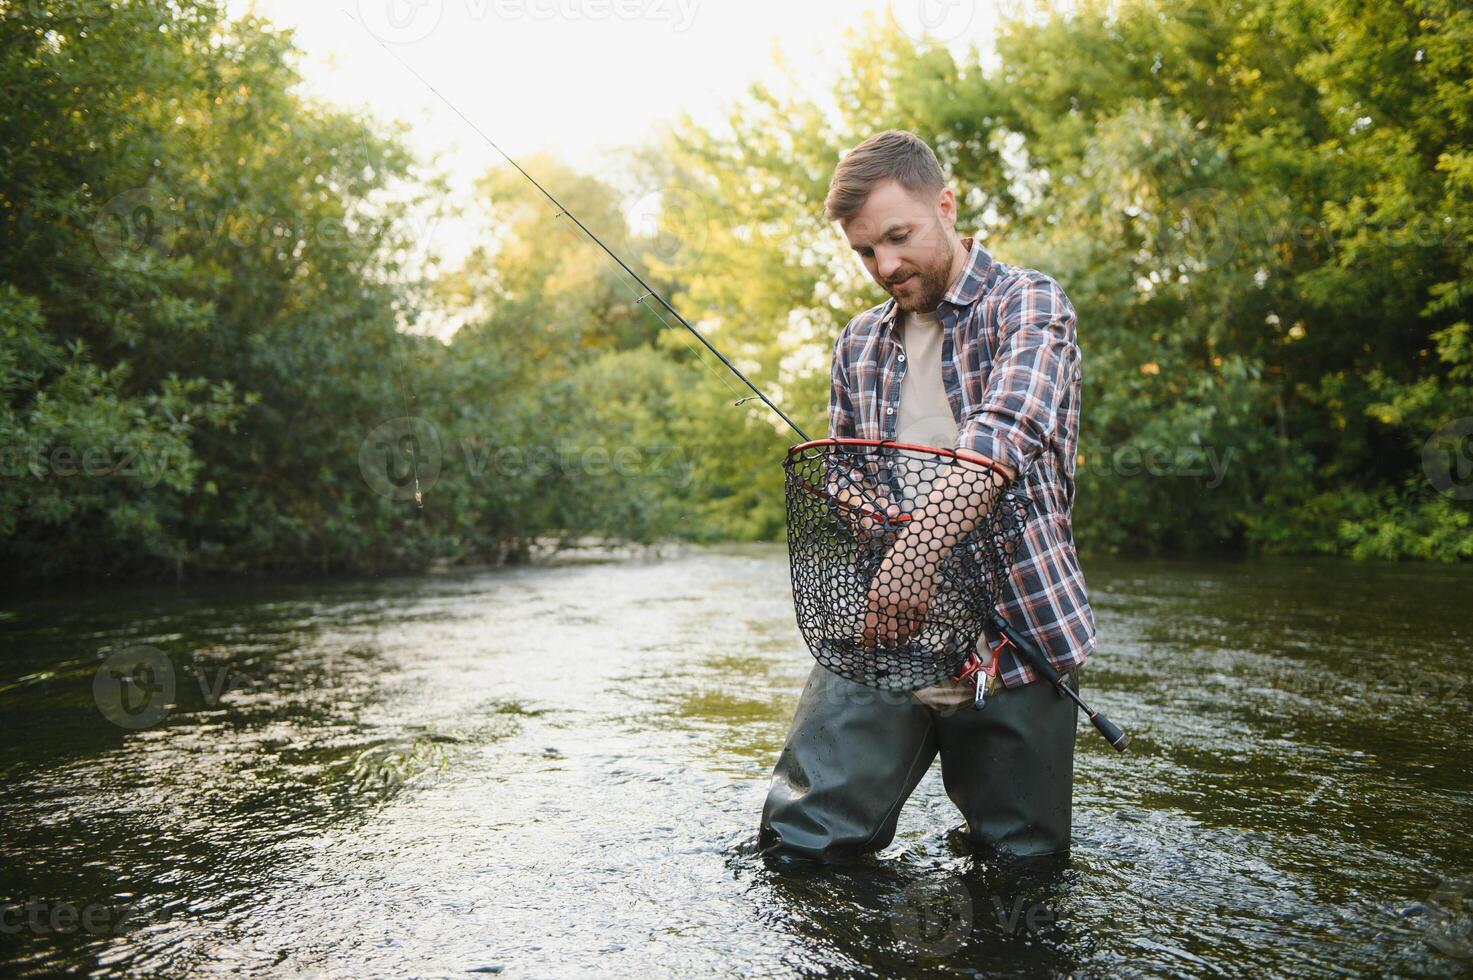 trout being caught in fishing net. photo